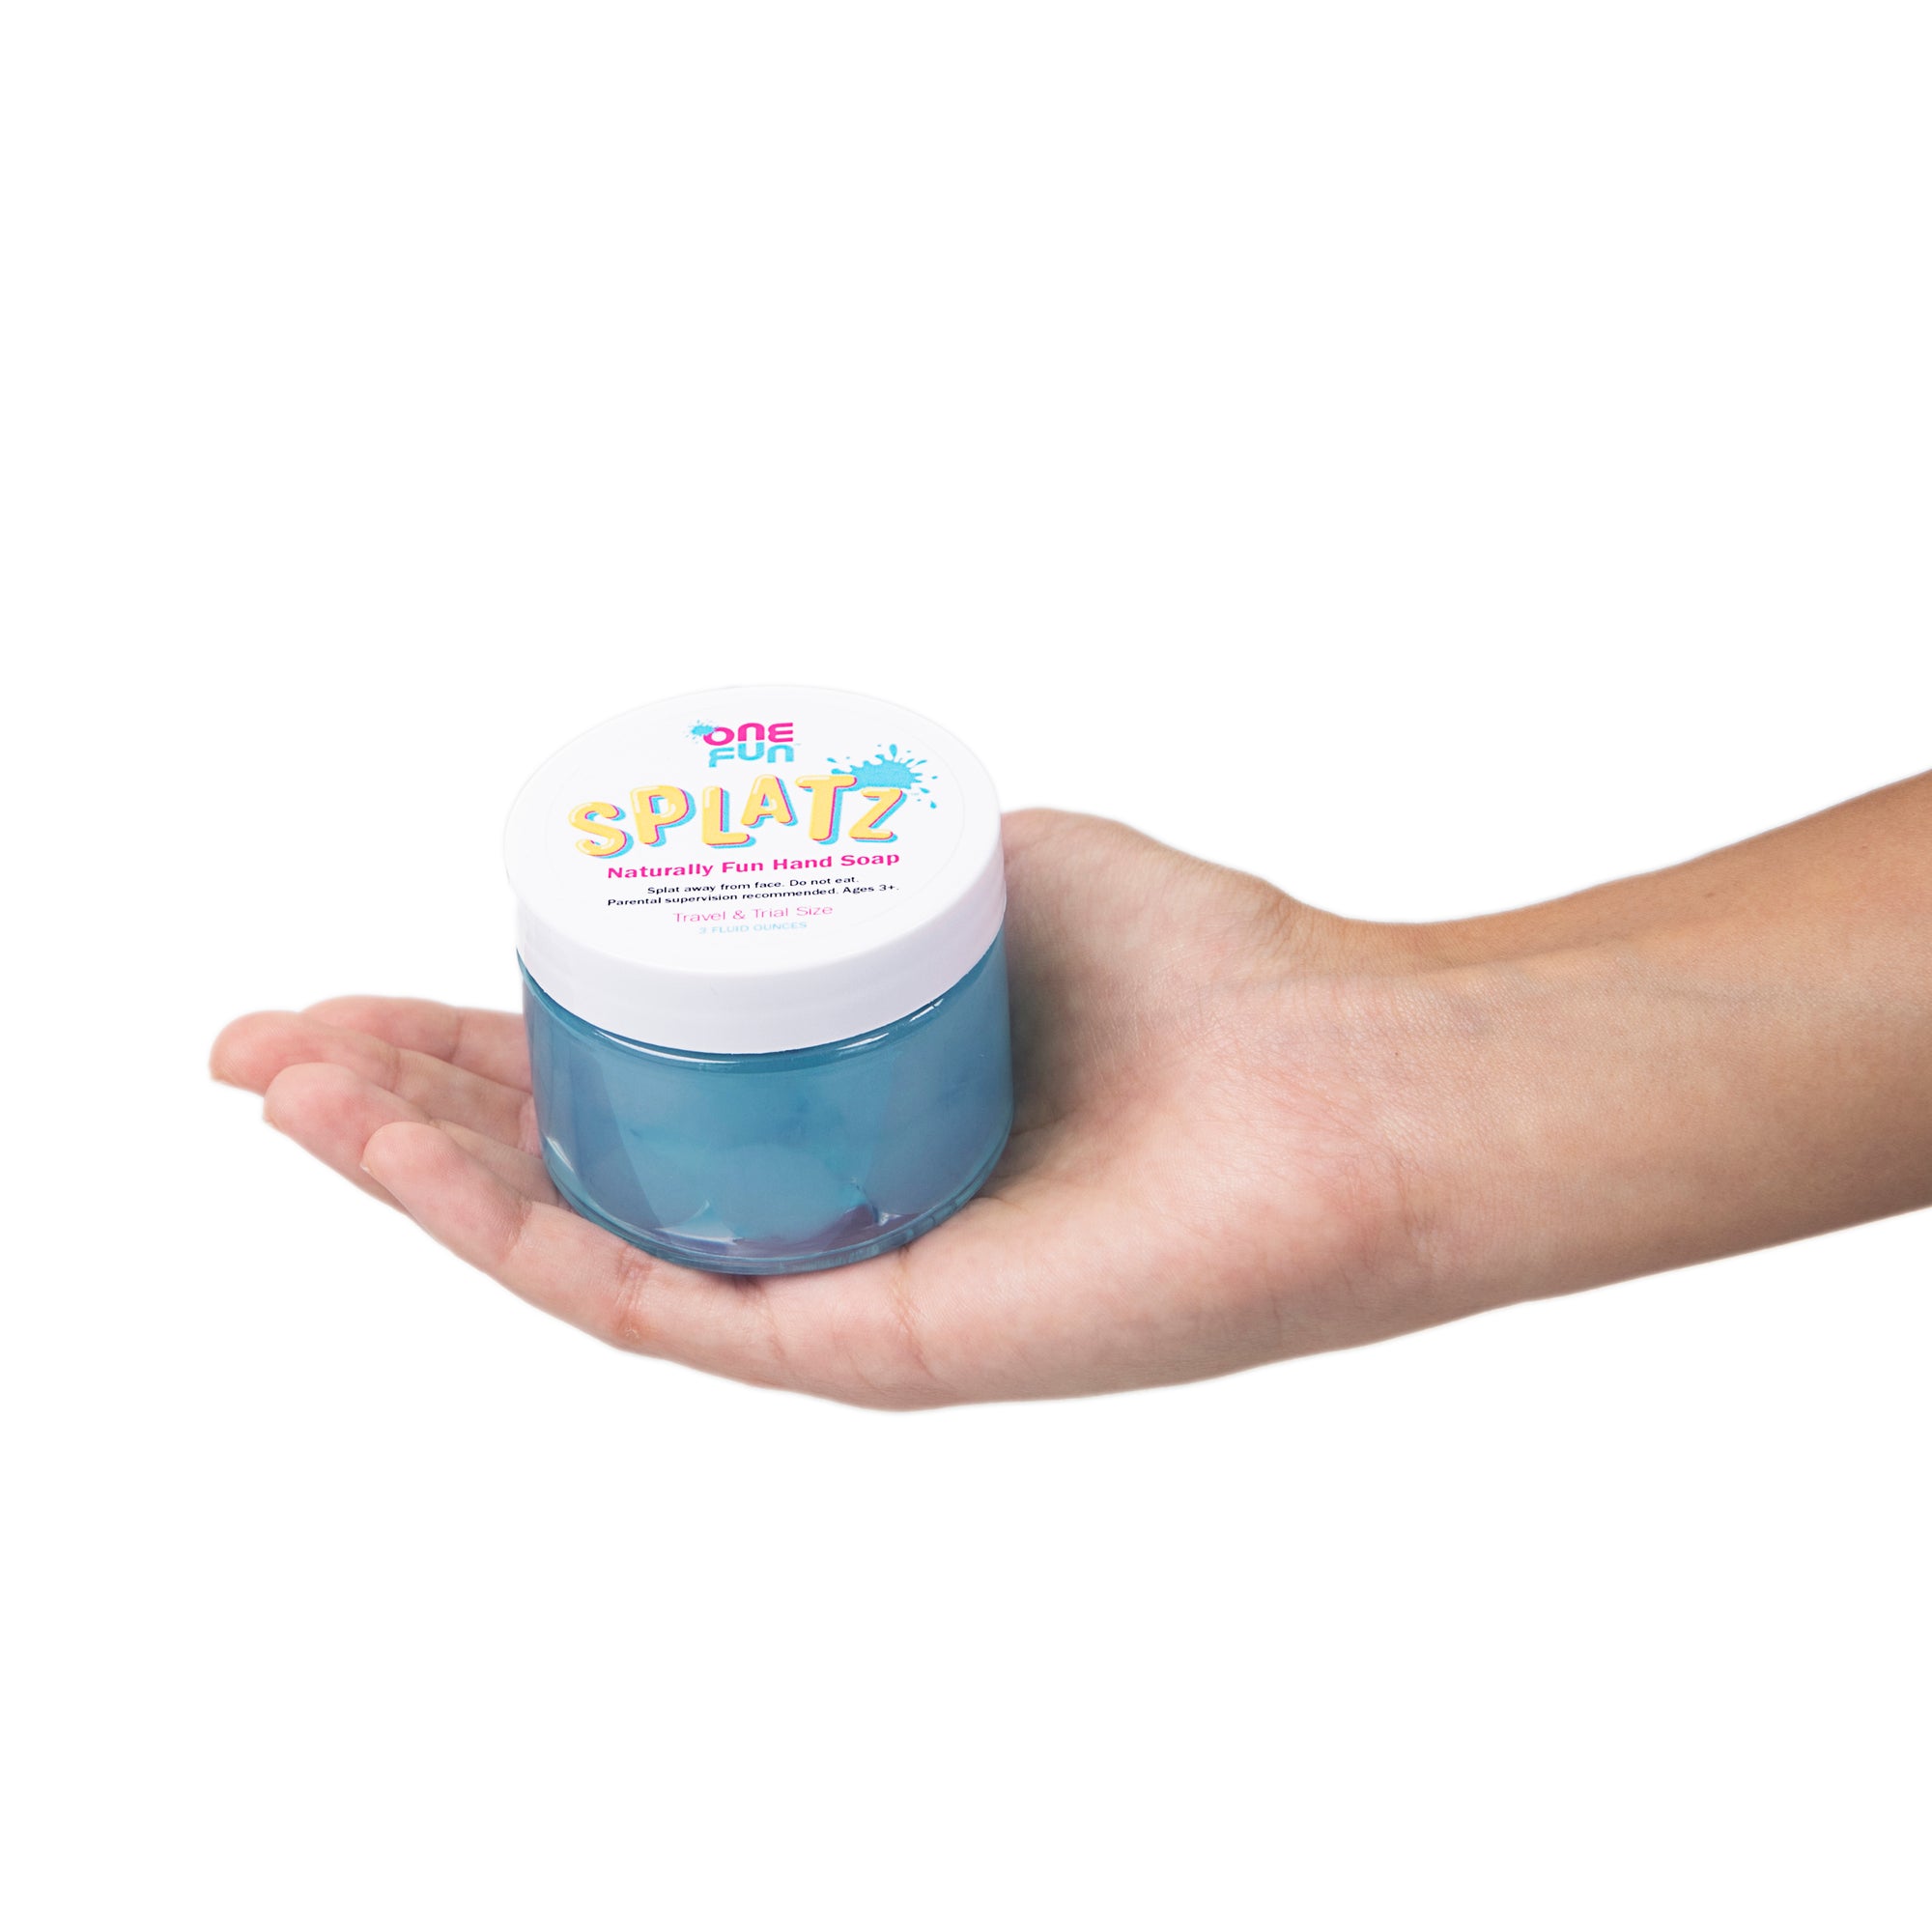 A 3oz jar of turquoise bursting soap bubbles held out in the palm of a hand